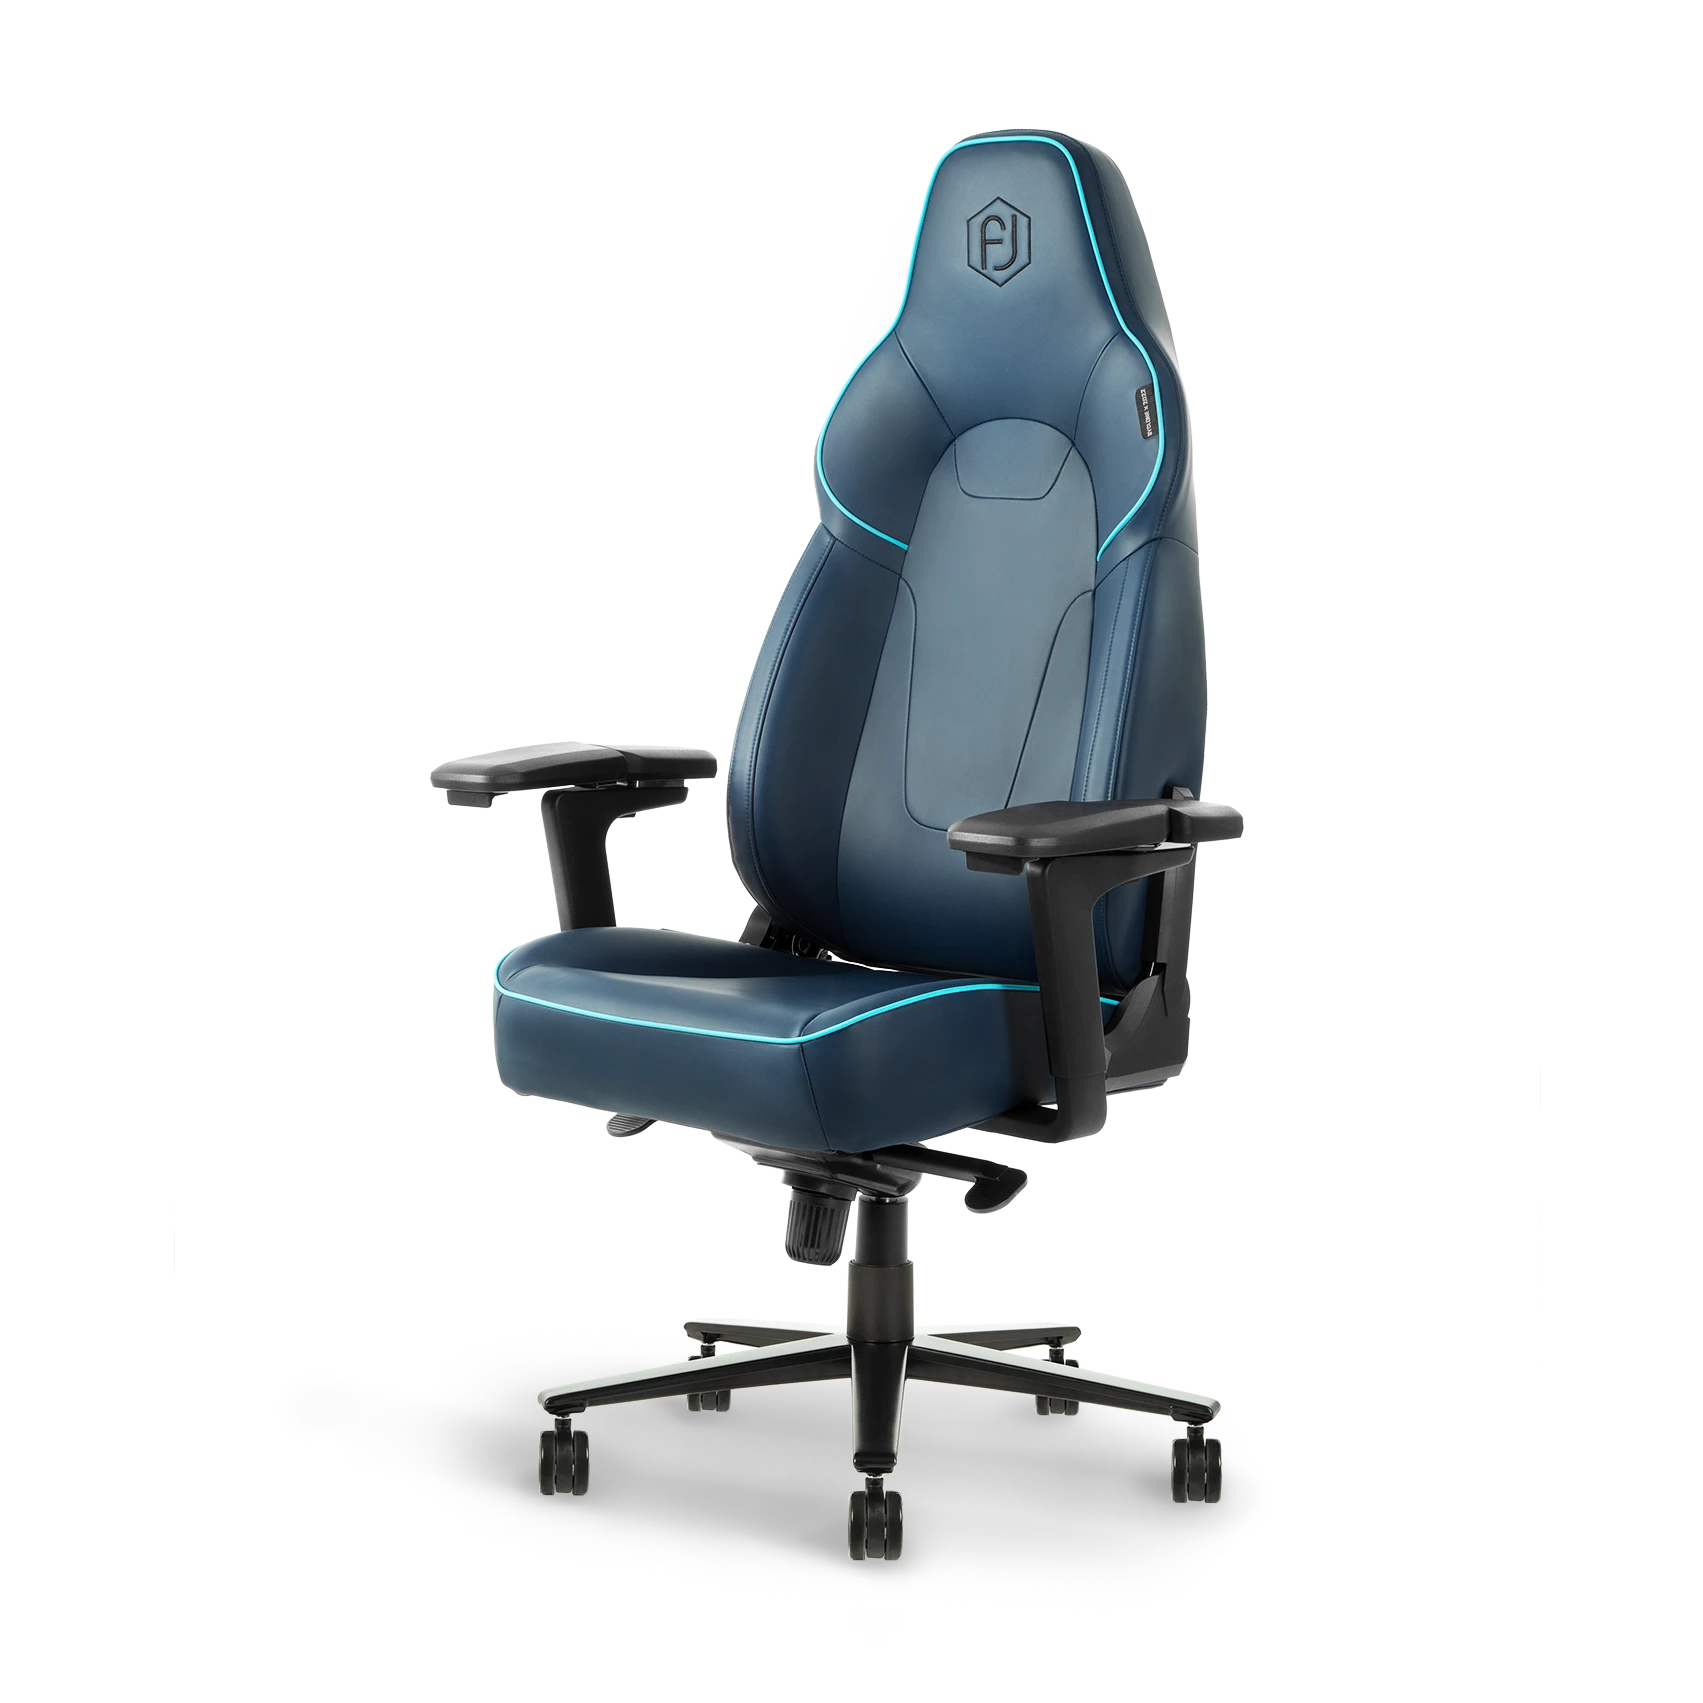 Blue ergonomic gaming chair with adjustable armrests and black accents, front view.